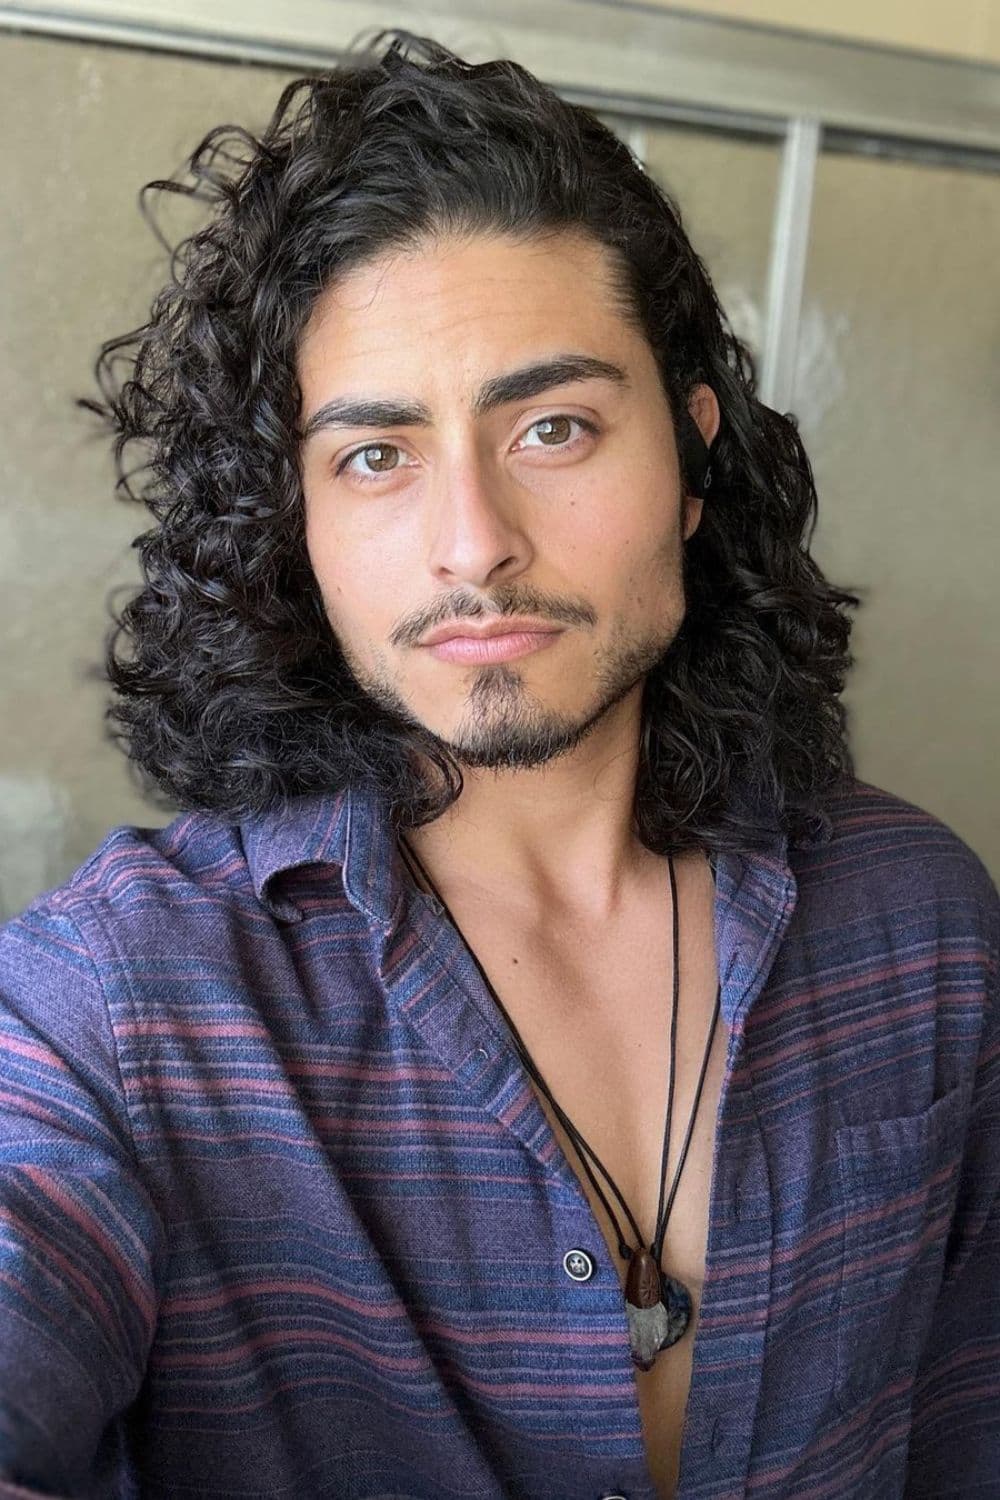 A man with a shoulder-length curly hair.